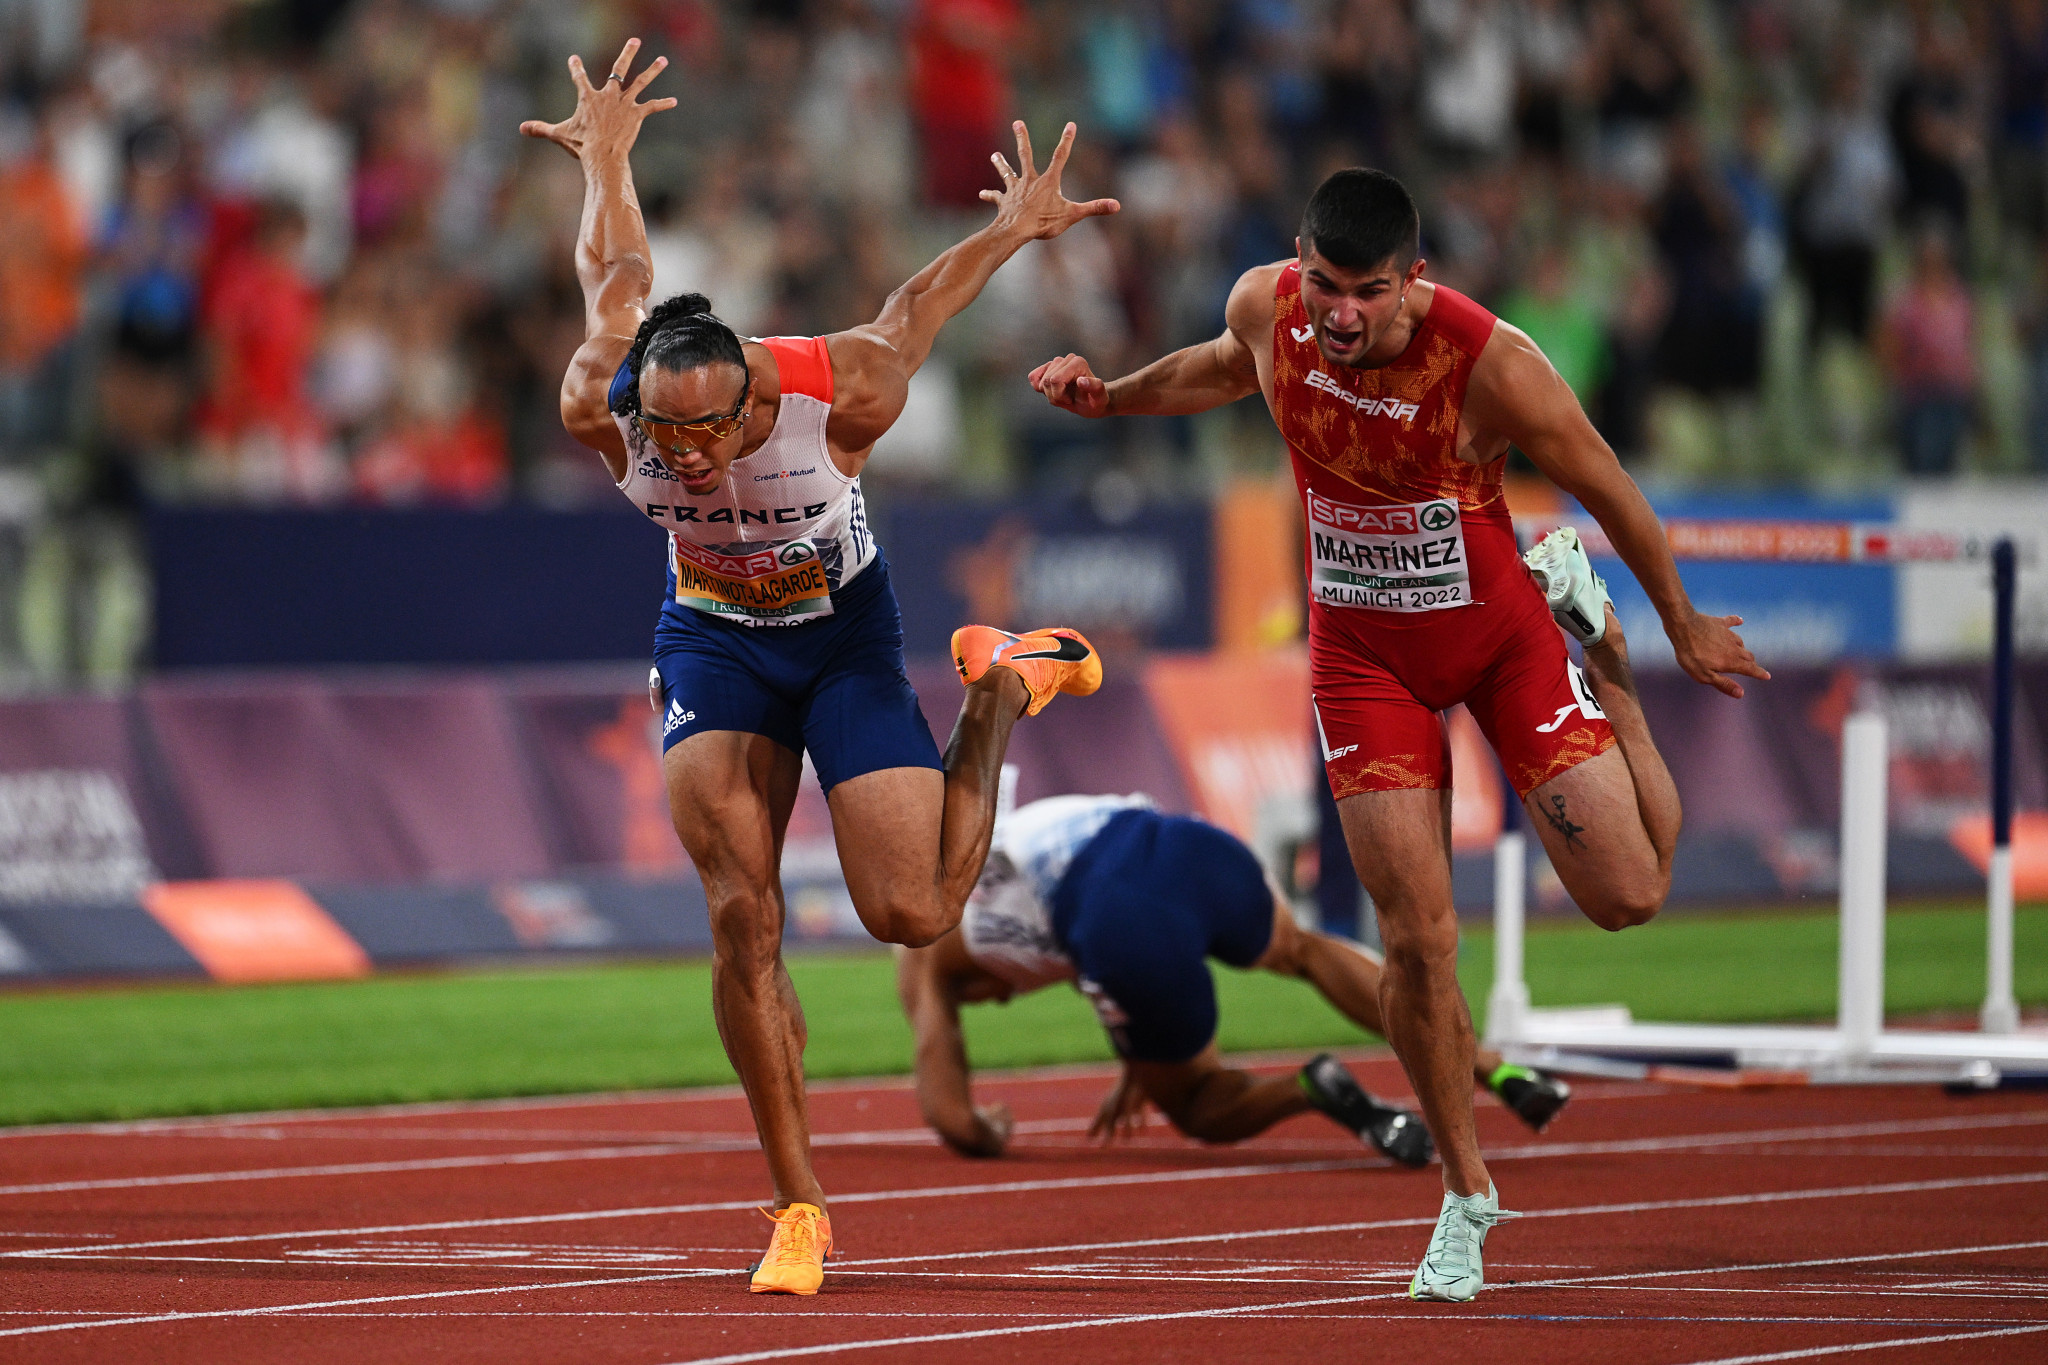 Spain's Asier Martinez, right, edged out Pascal Martinot-Lagarde of France, left, in a thrilling men's 110m hurdles final ©Getty Images